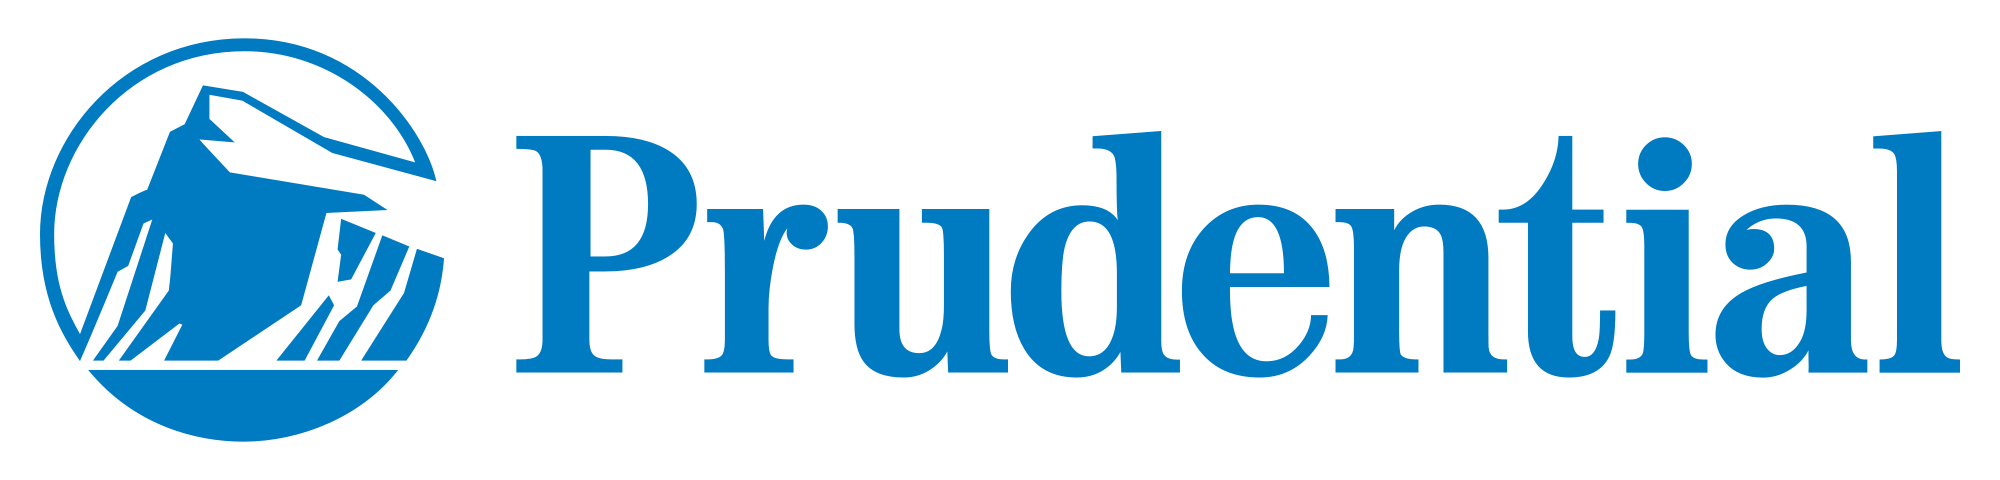 Prudential Financial.svg.png, Prudential Financial PNG - Free PNG